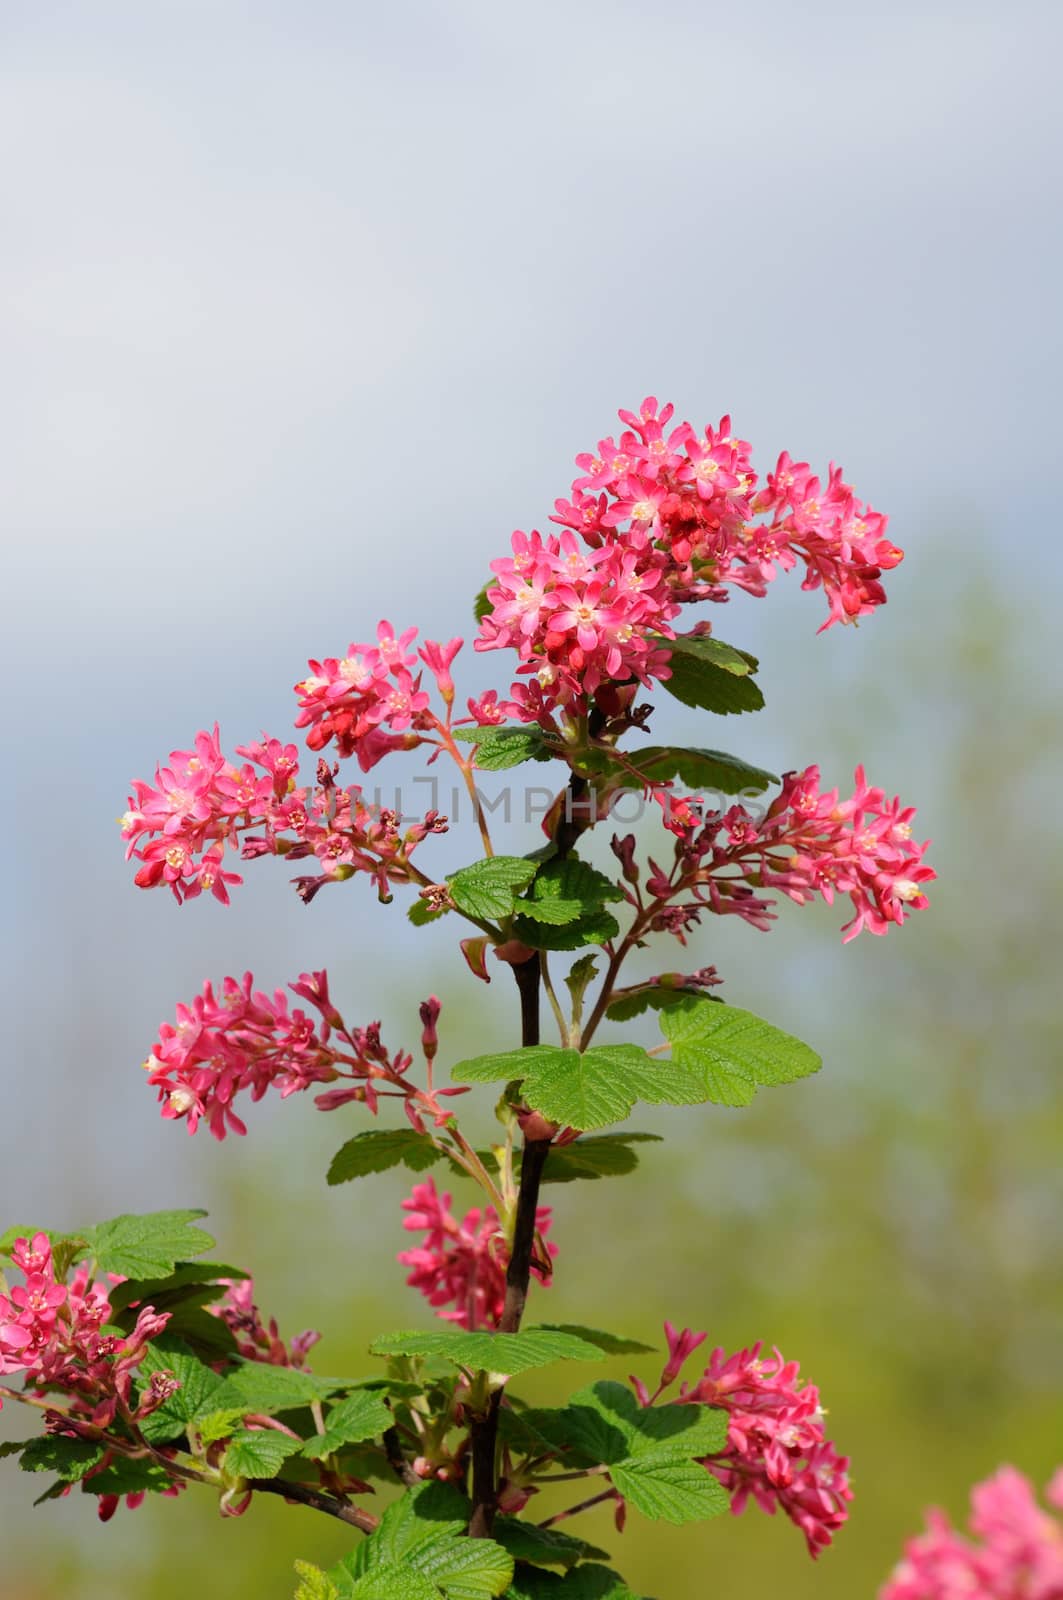 Tree branch with small pink flowers in Fulda, Hessen, Germany by Eagle2308